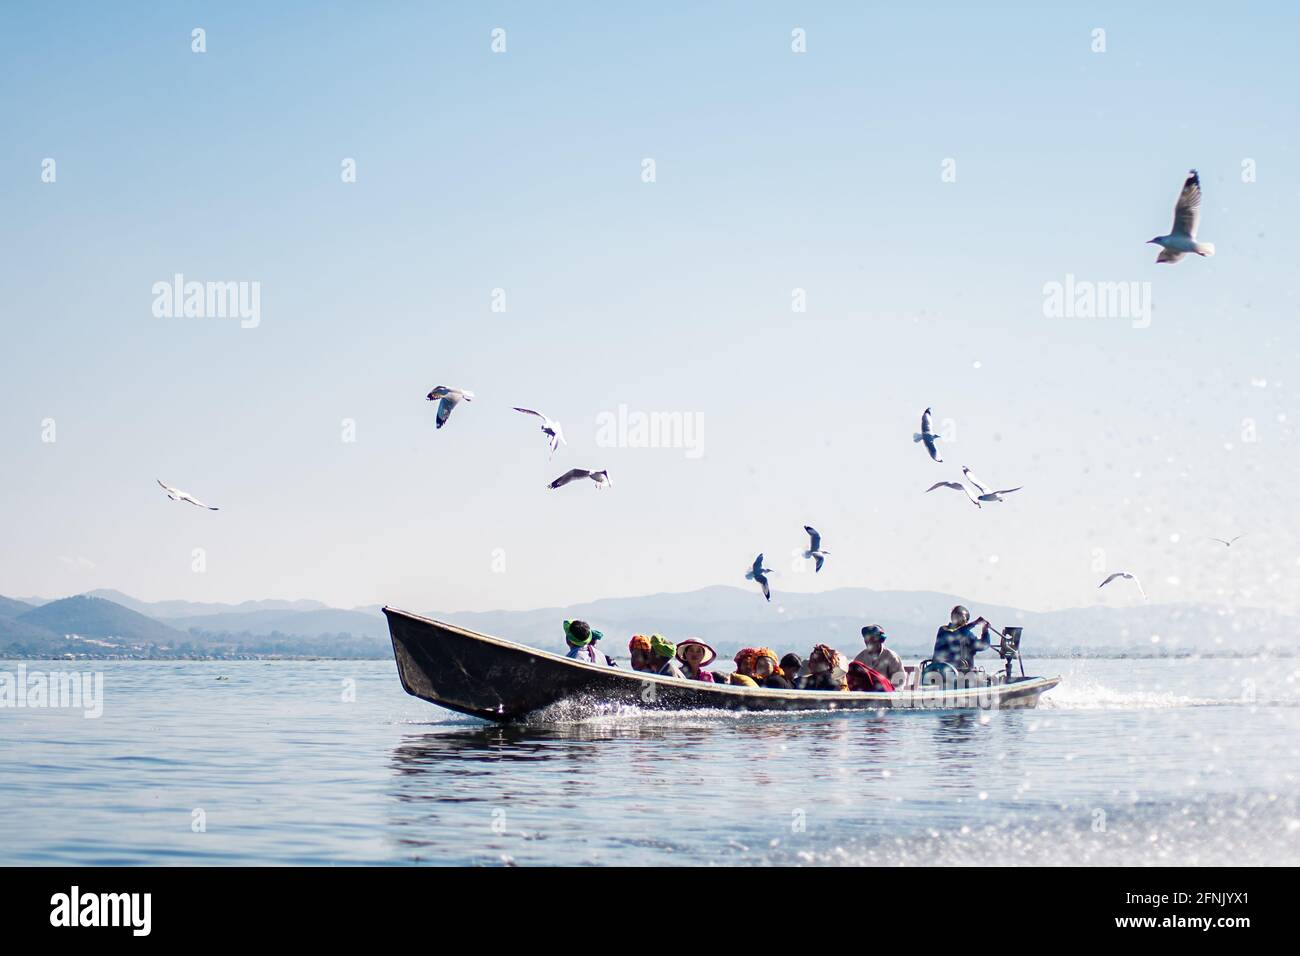 Inle Lake, Nyaung Shwe, Shan state, Myanmar - January 7 2020: Locals travels by traditional boat with birds above and mountains in the background Stock Photo